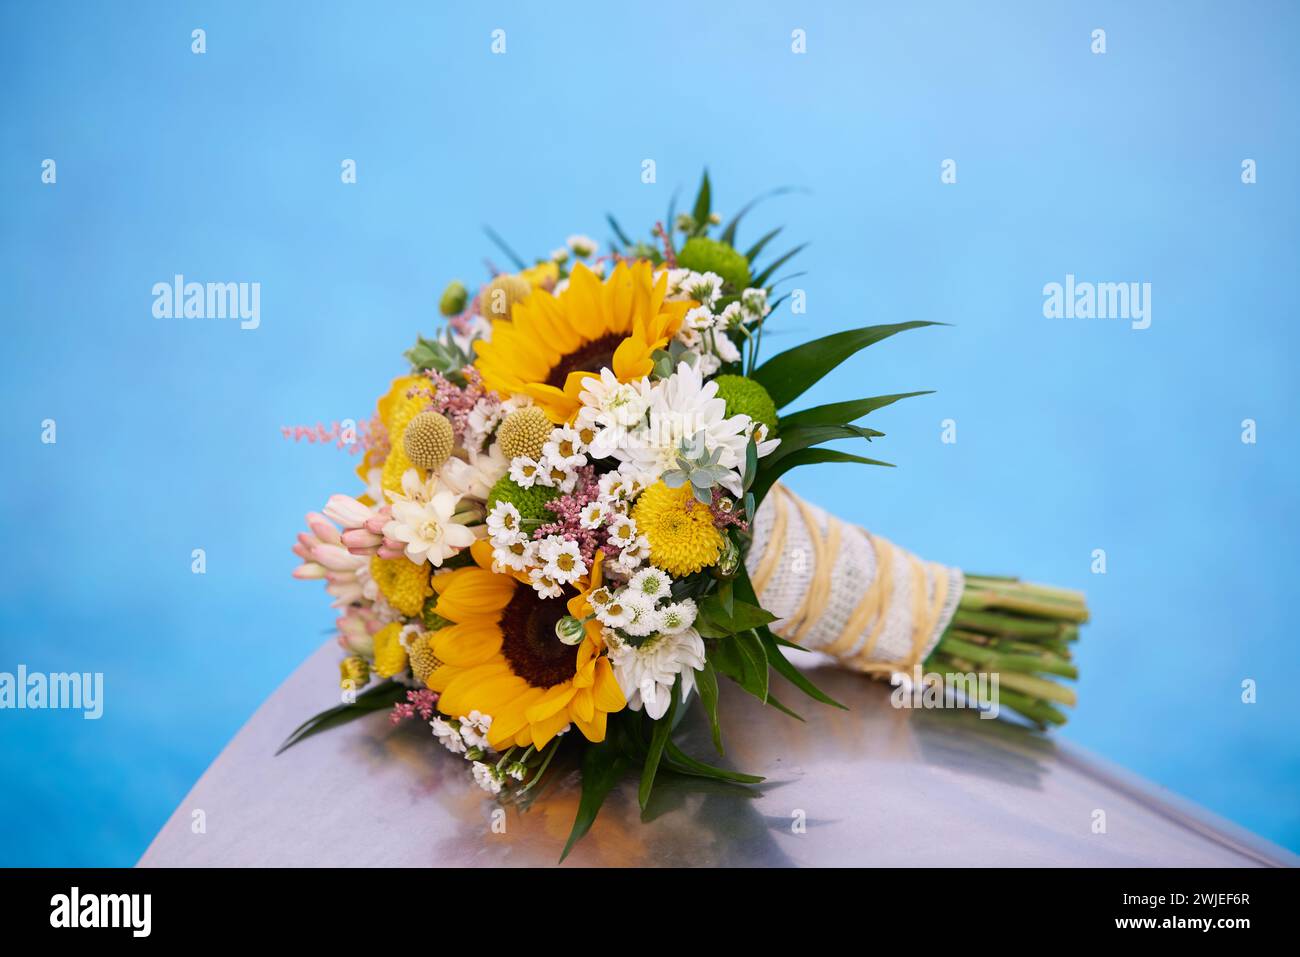 A bouquet of sunflowers and baby's breath daisies Stock Photo